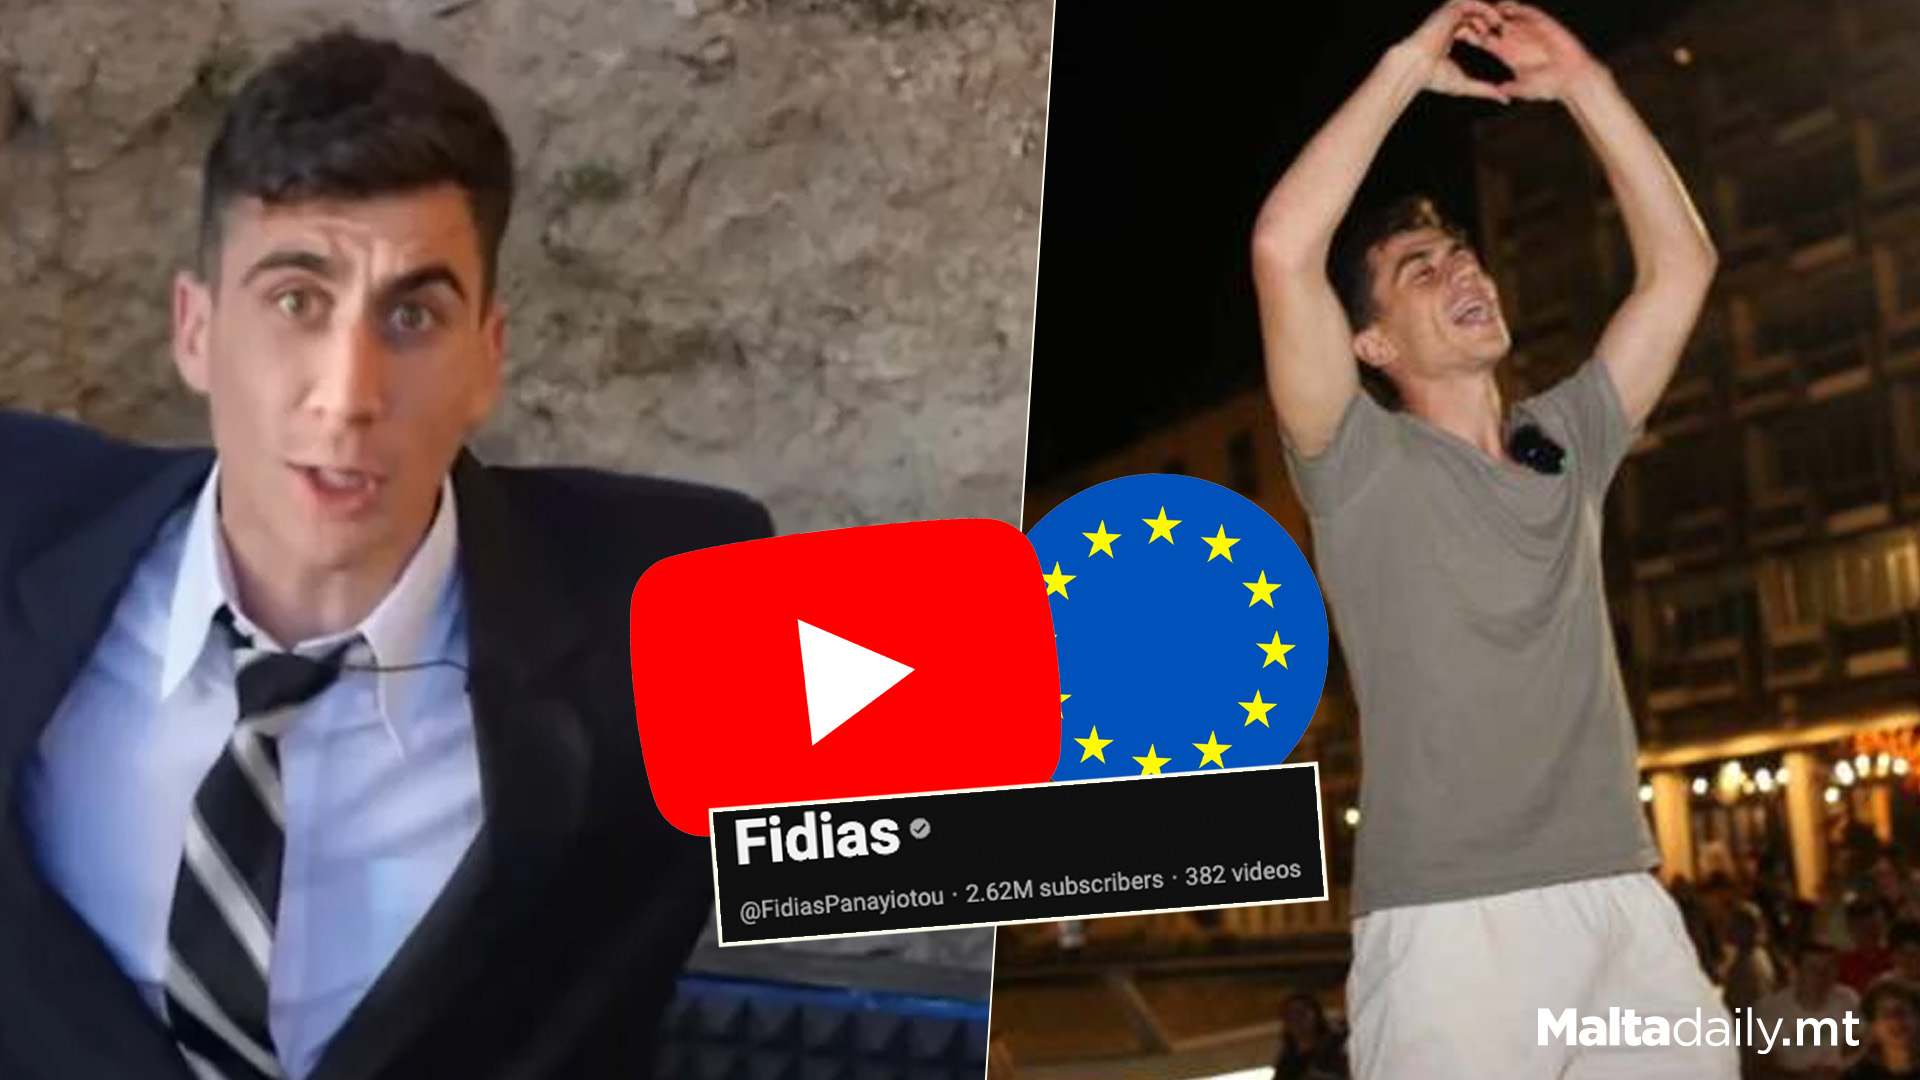 24 Year Old Cypriot YouTuber Elected To European Parliament